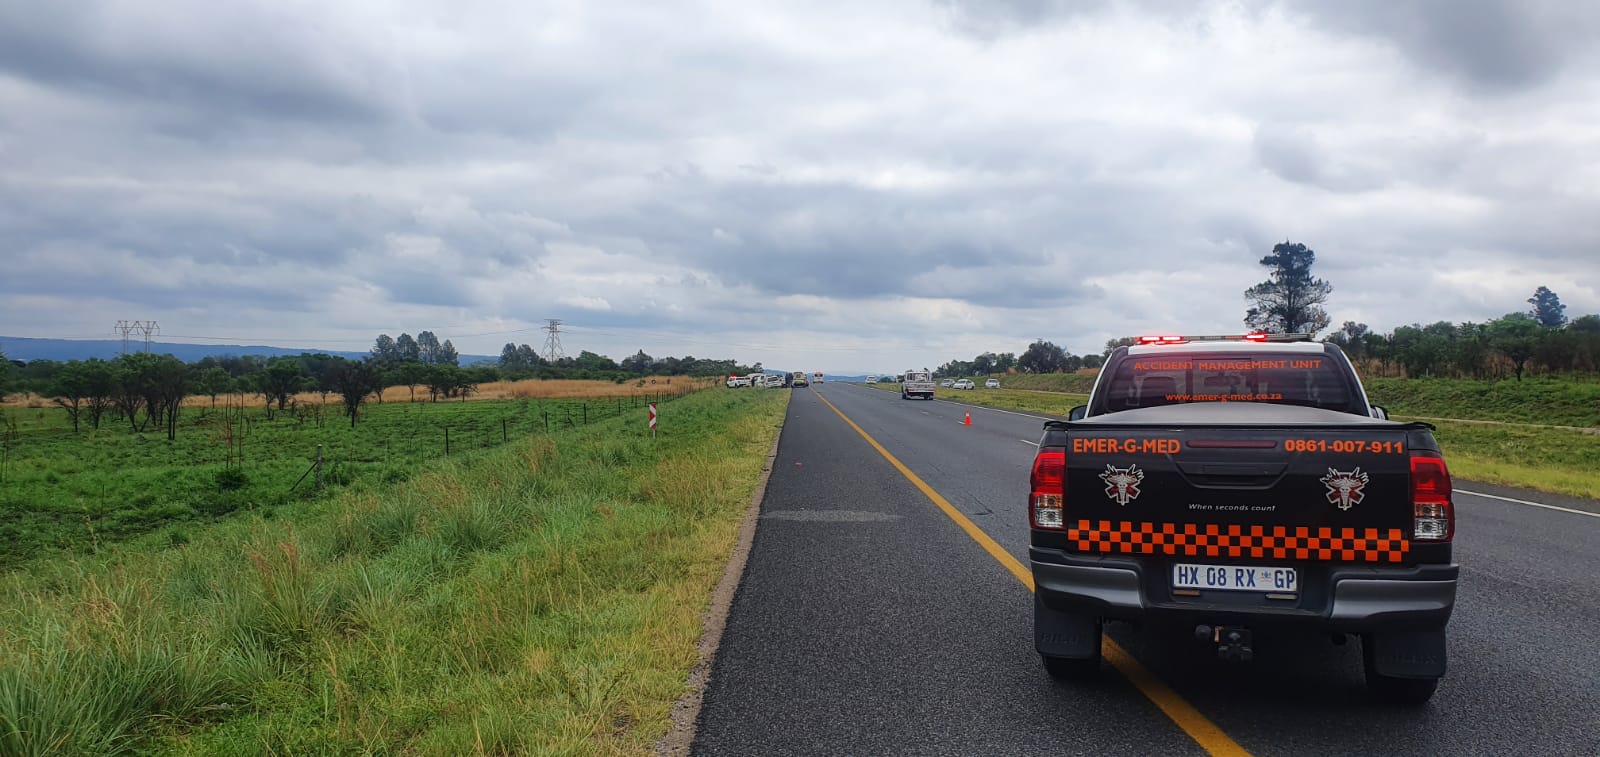 One dead, two injured in a shooting incident on the N3 in Donkerhoek